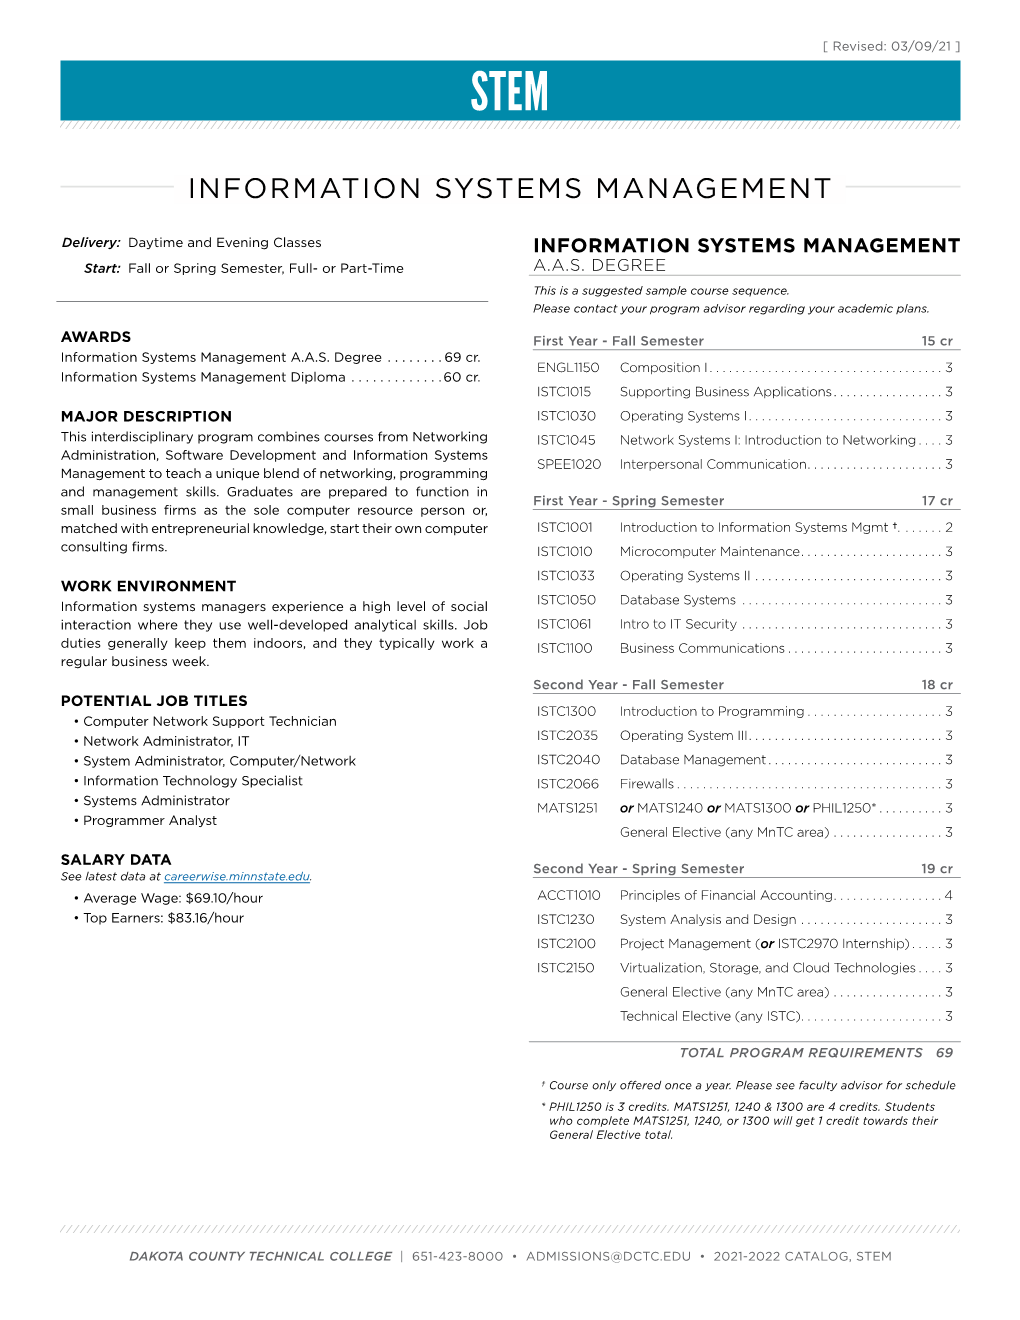 Get the Information Systems Management Datasheet